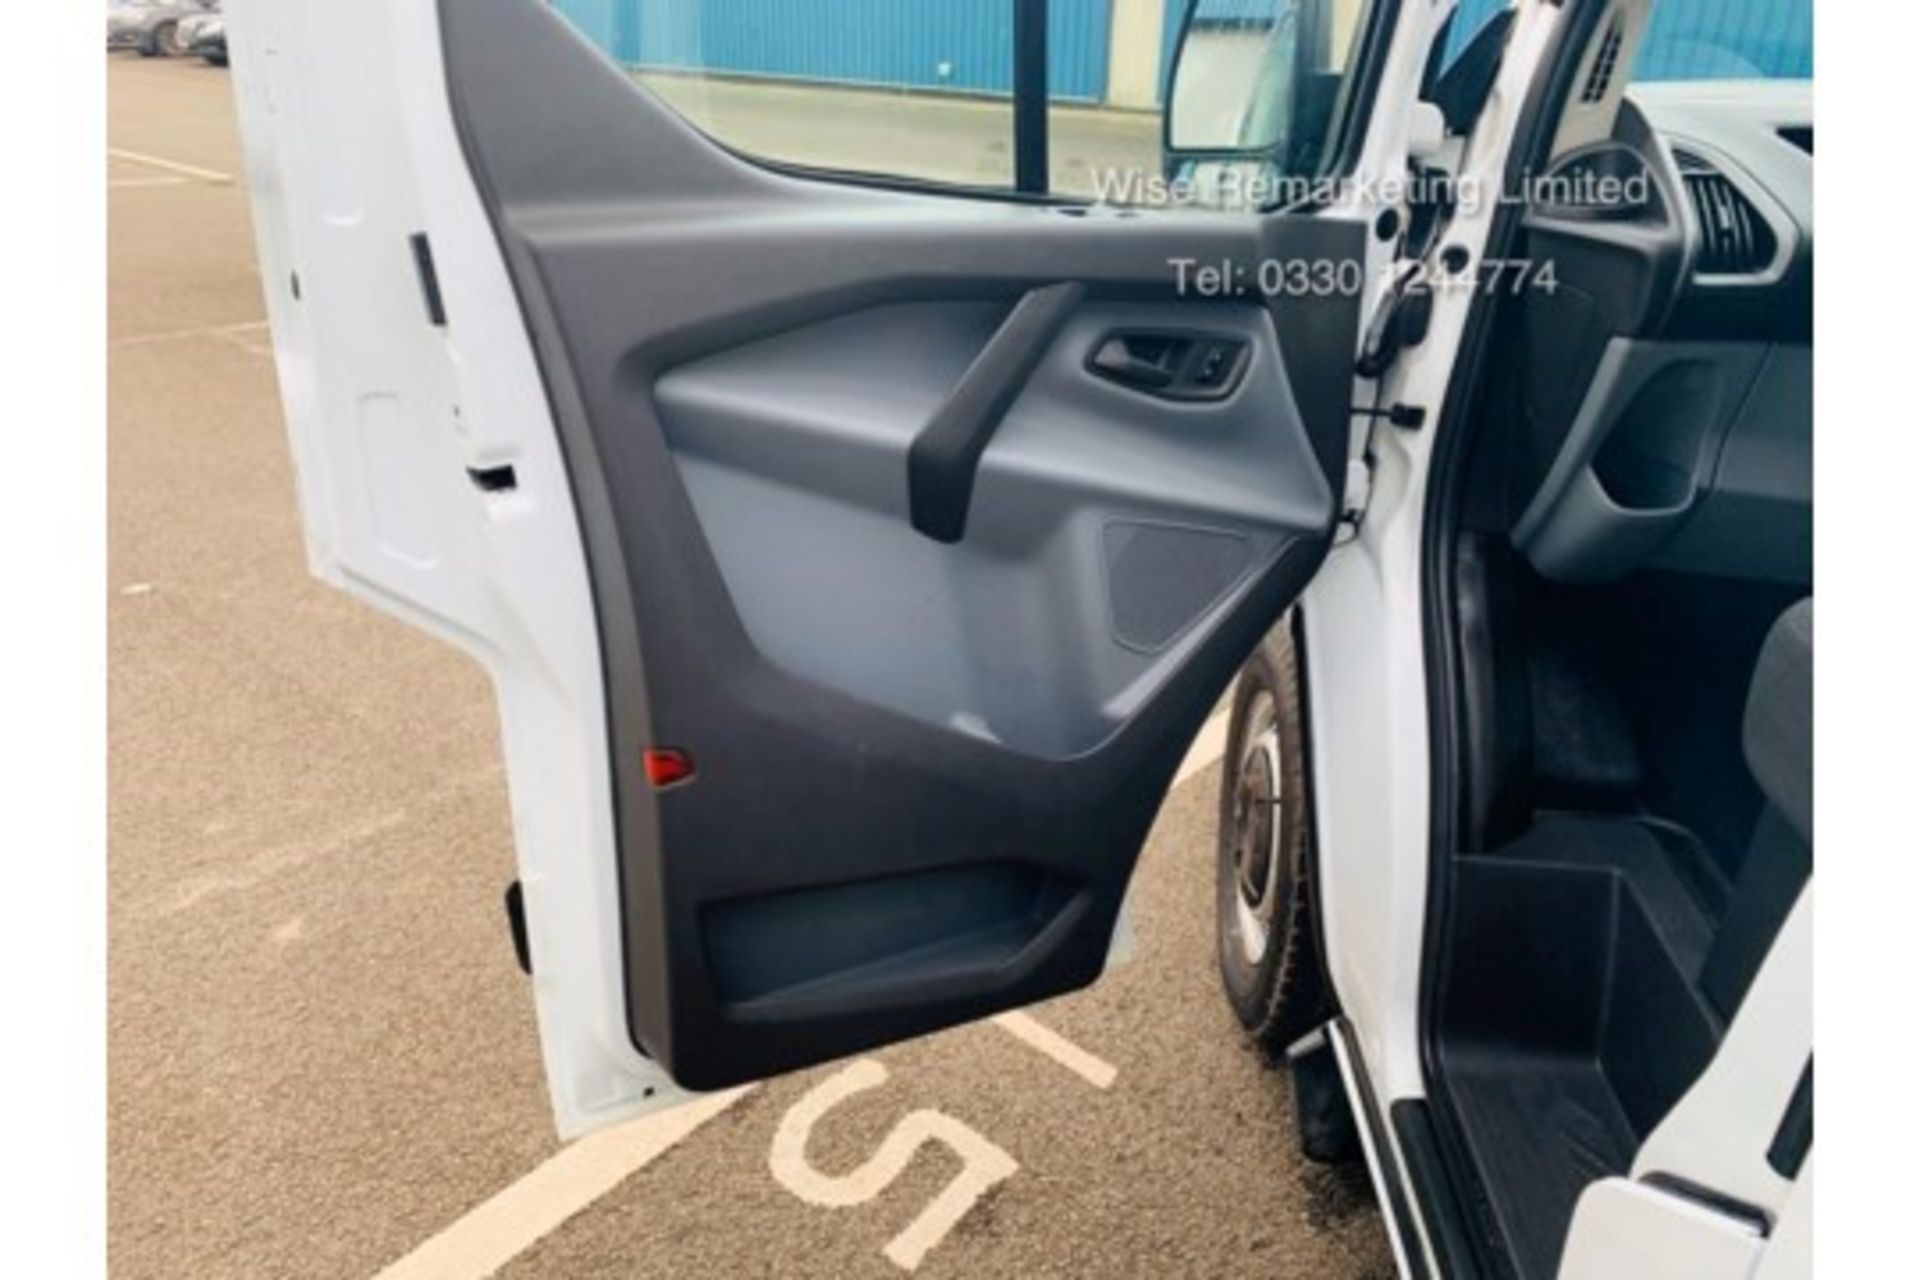 (RESERVE MET)Ford Transit Custom 2.2 TDCI 290 **HIGH ROOF** - 2016 model - AIR CON- 1 OWNER- FSH- - Image 9 of 18